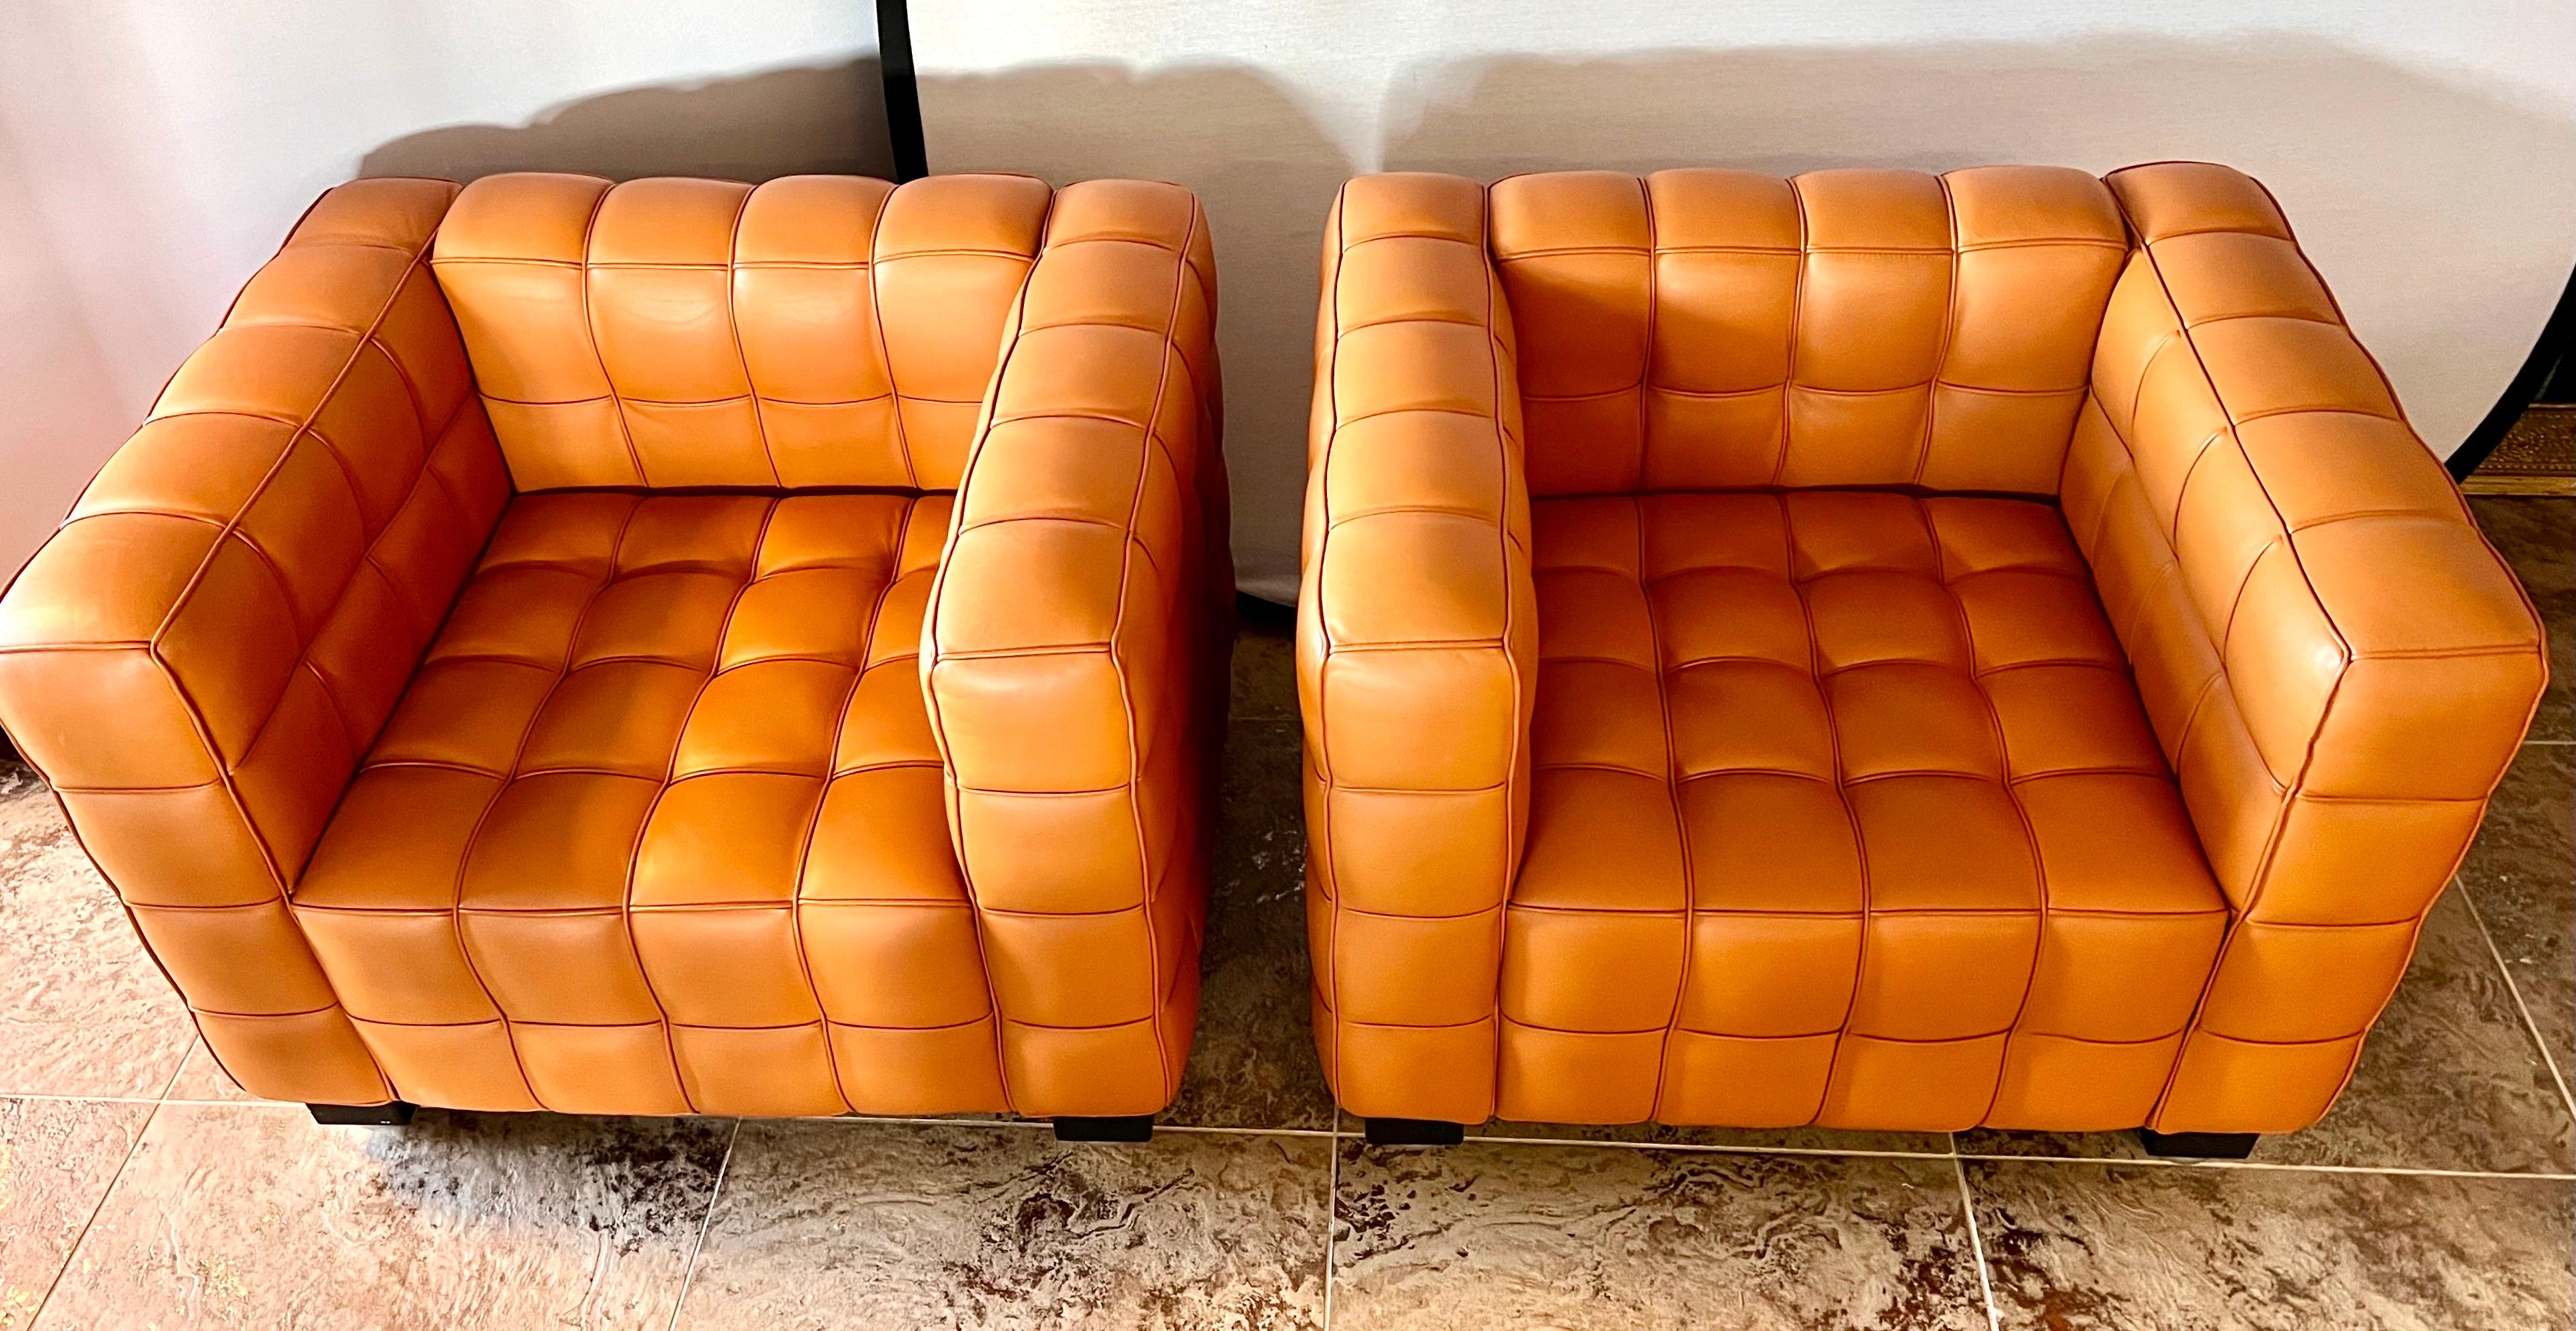 Stunning pair of signed Wittman Leather Kubus armchairs designed by Josef Hoffmann.  Circa early 21st century in Austria.  They are in excellent condition and look like they have never been sat in.  Will not last.  See our other listing for a single